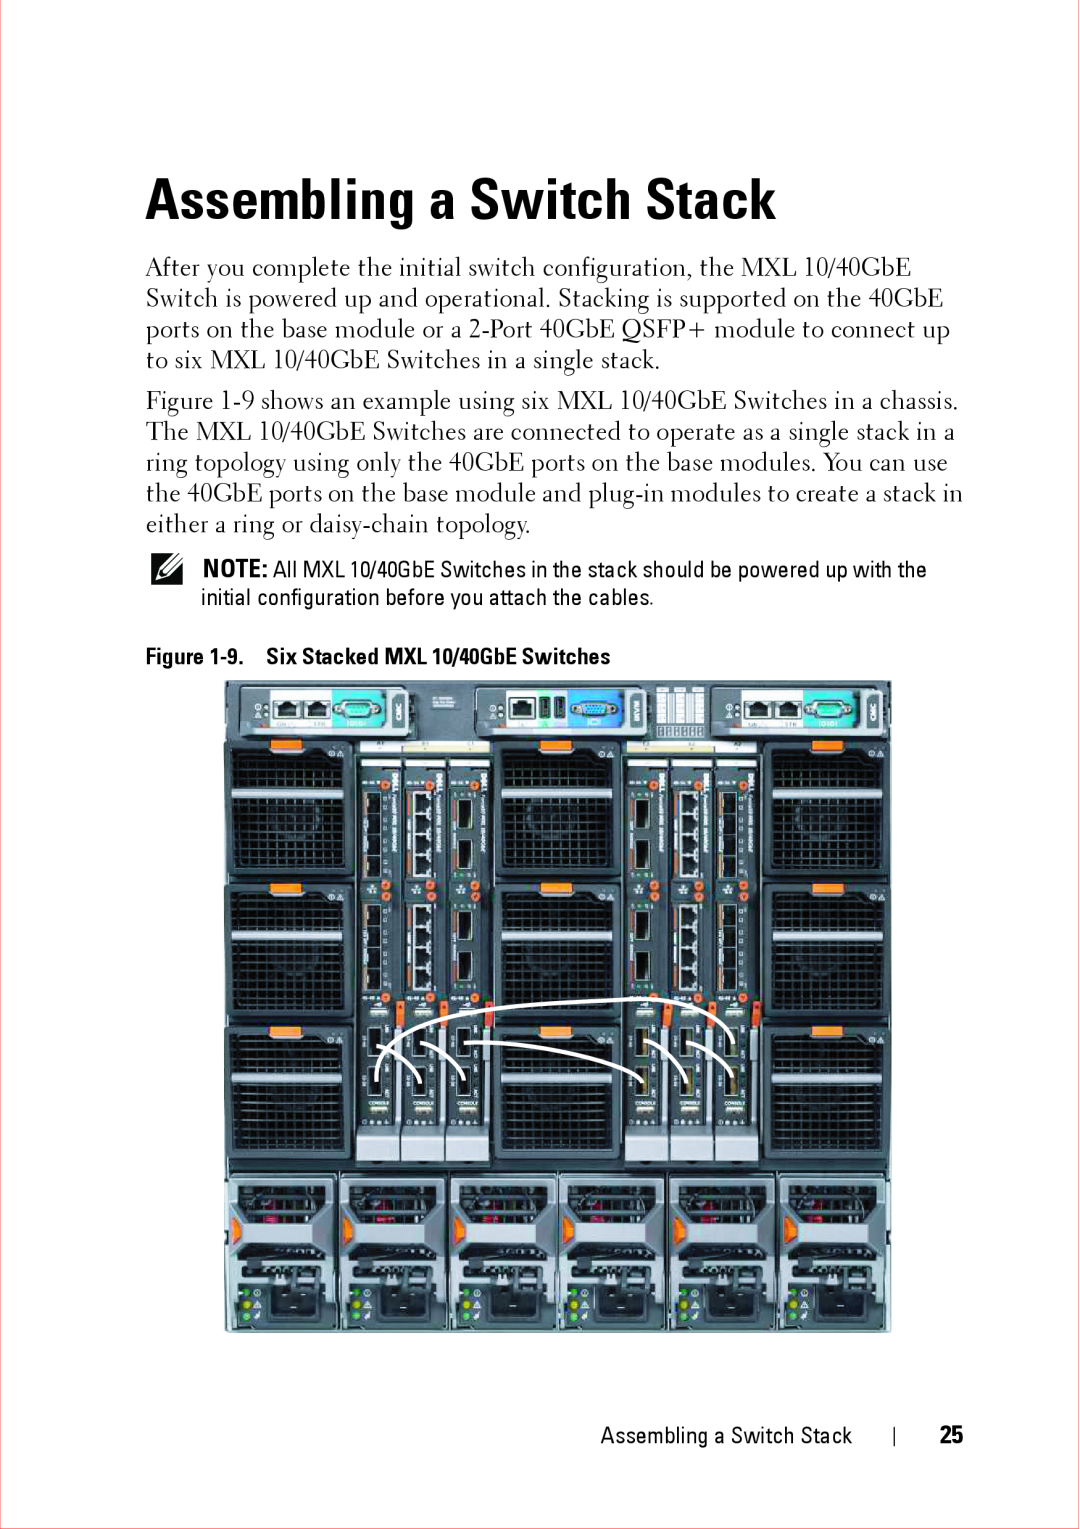 Force10 Networks CC-C-BLNK-LC manual Assembling a Switch Stack, 9. Six Stacked MXL 10/40GbE Switches 